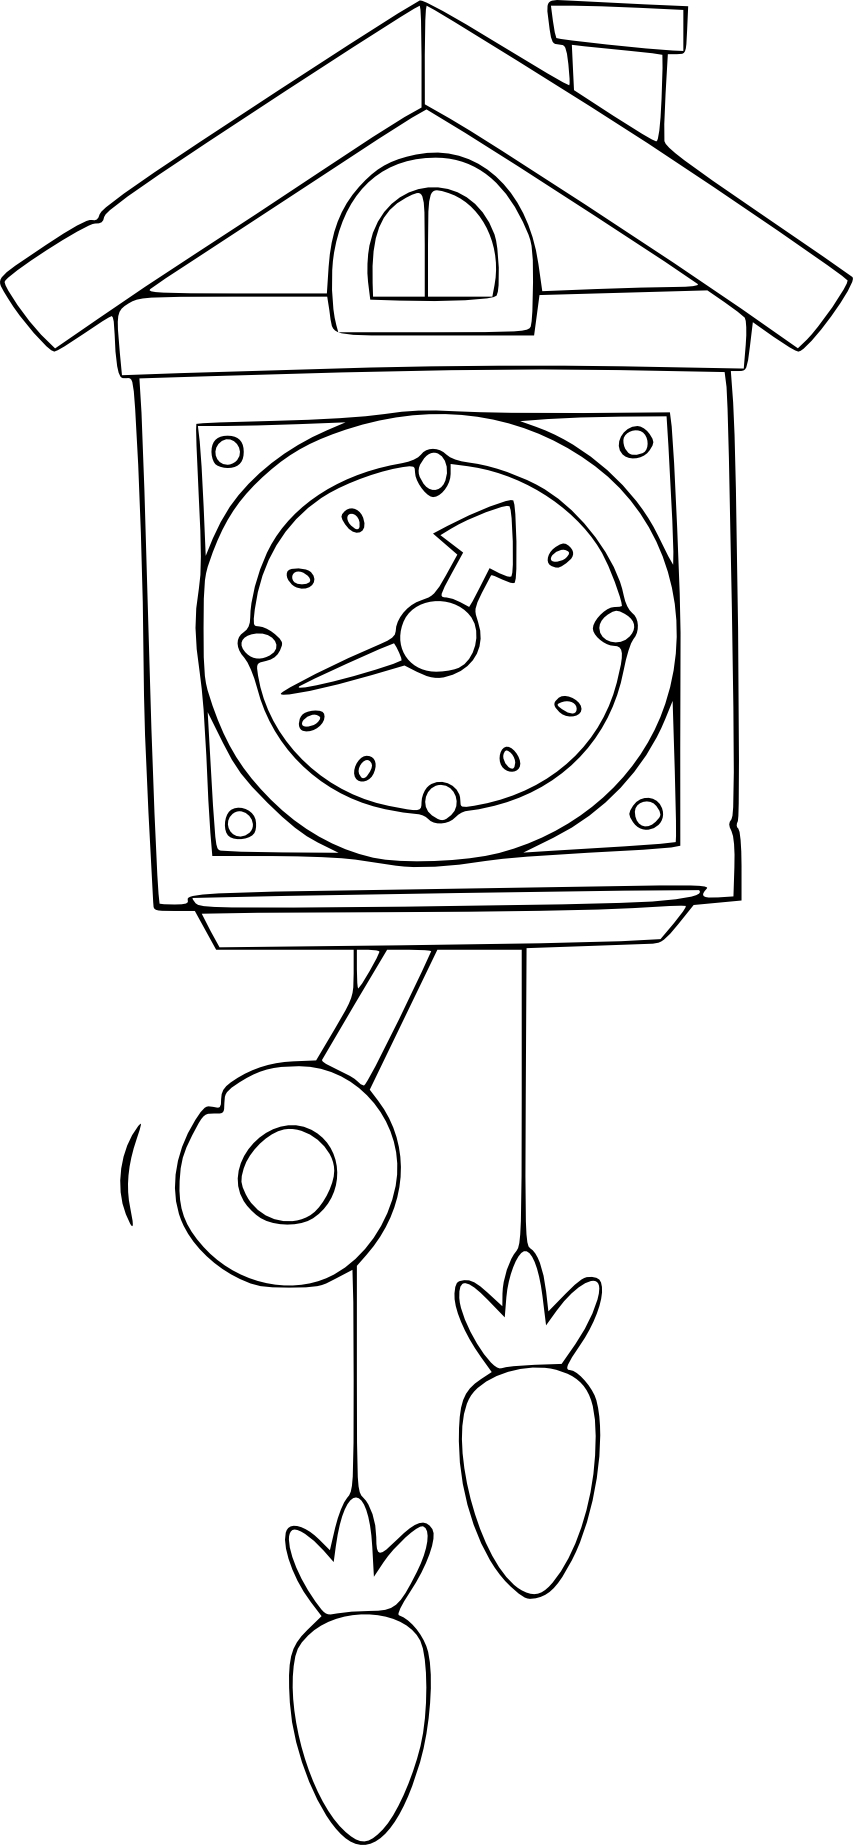 Clock coloring page